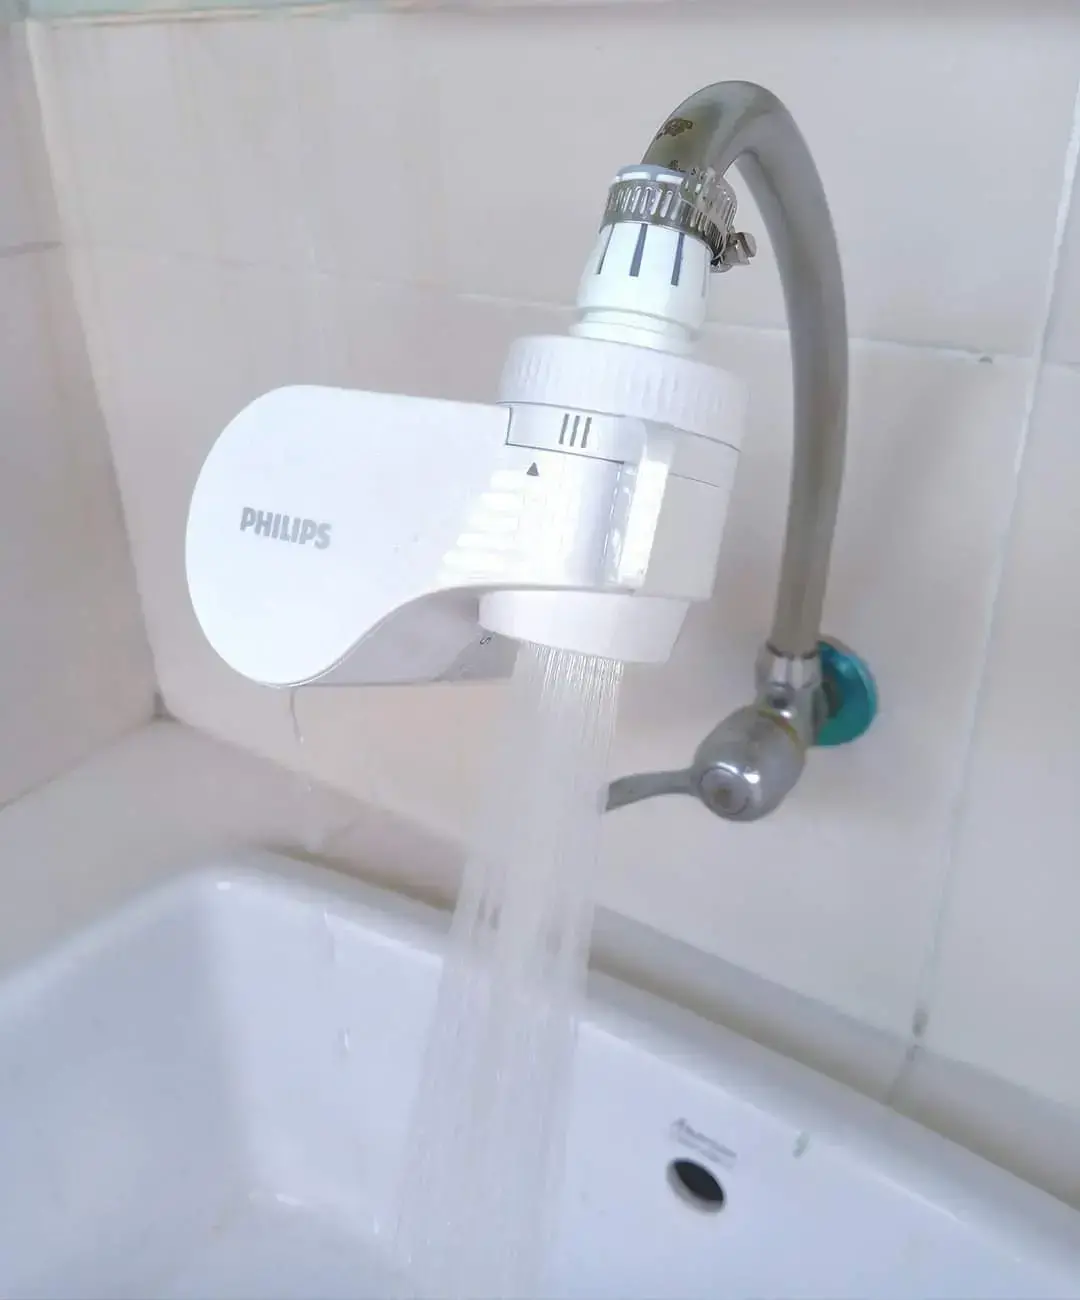 Philips water purifier household direct drinking kitchen tap water